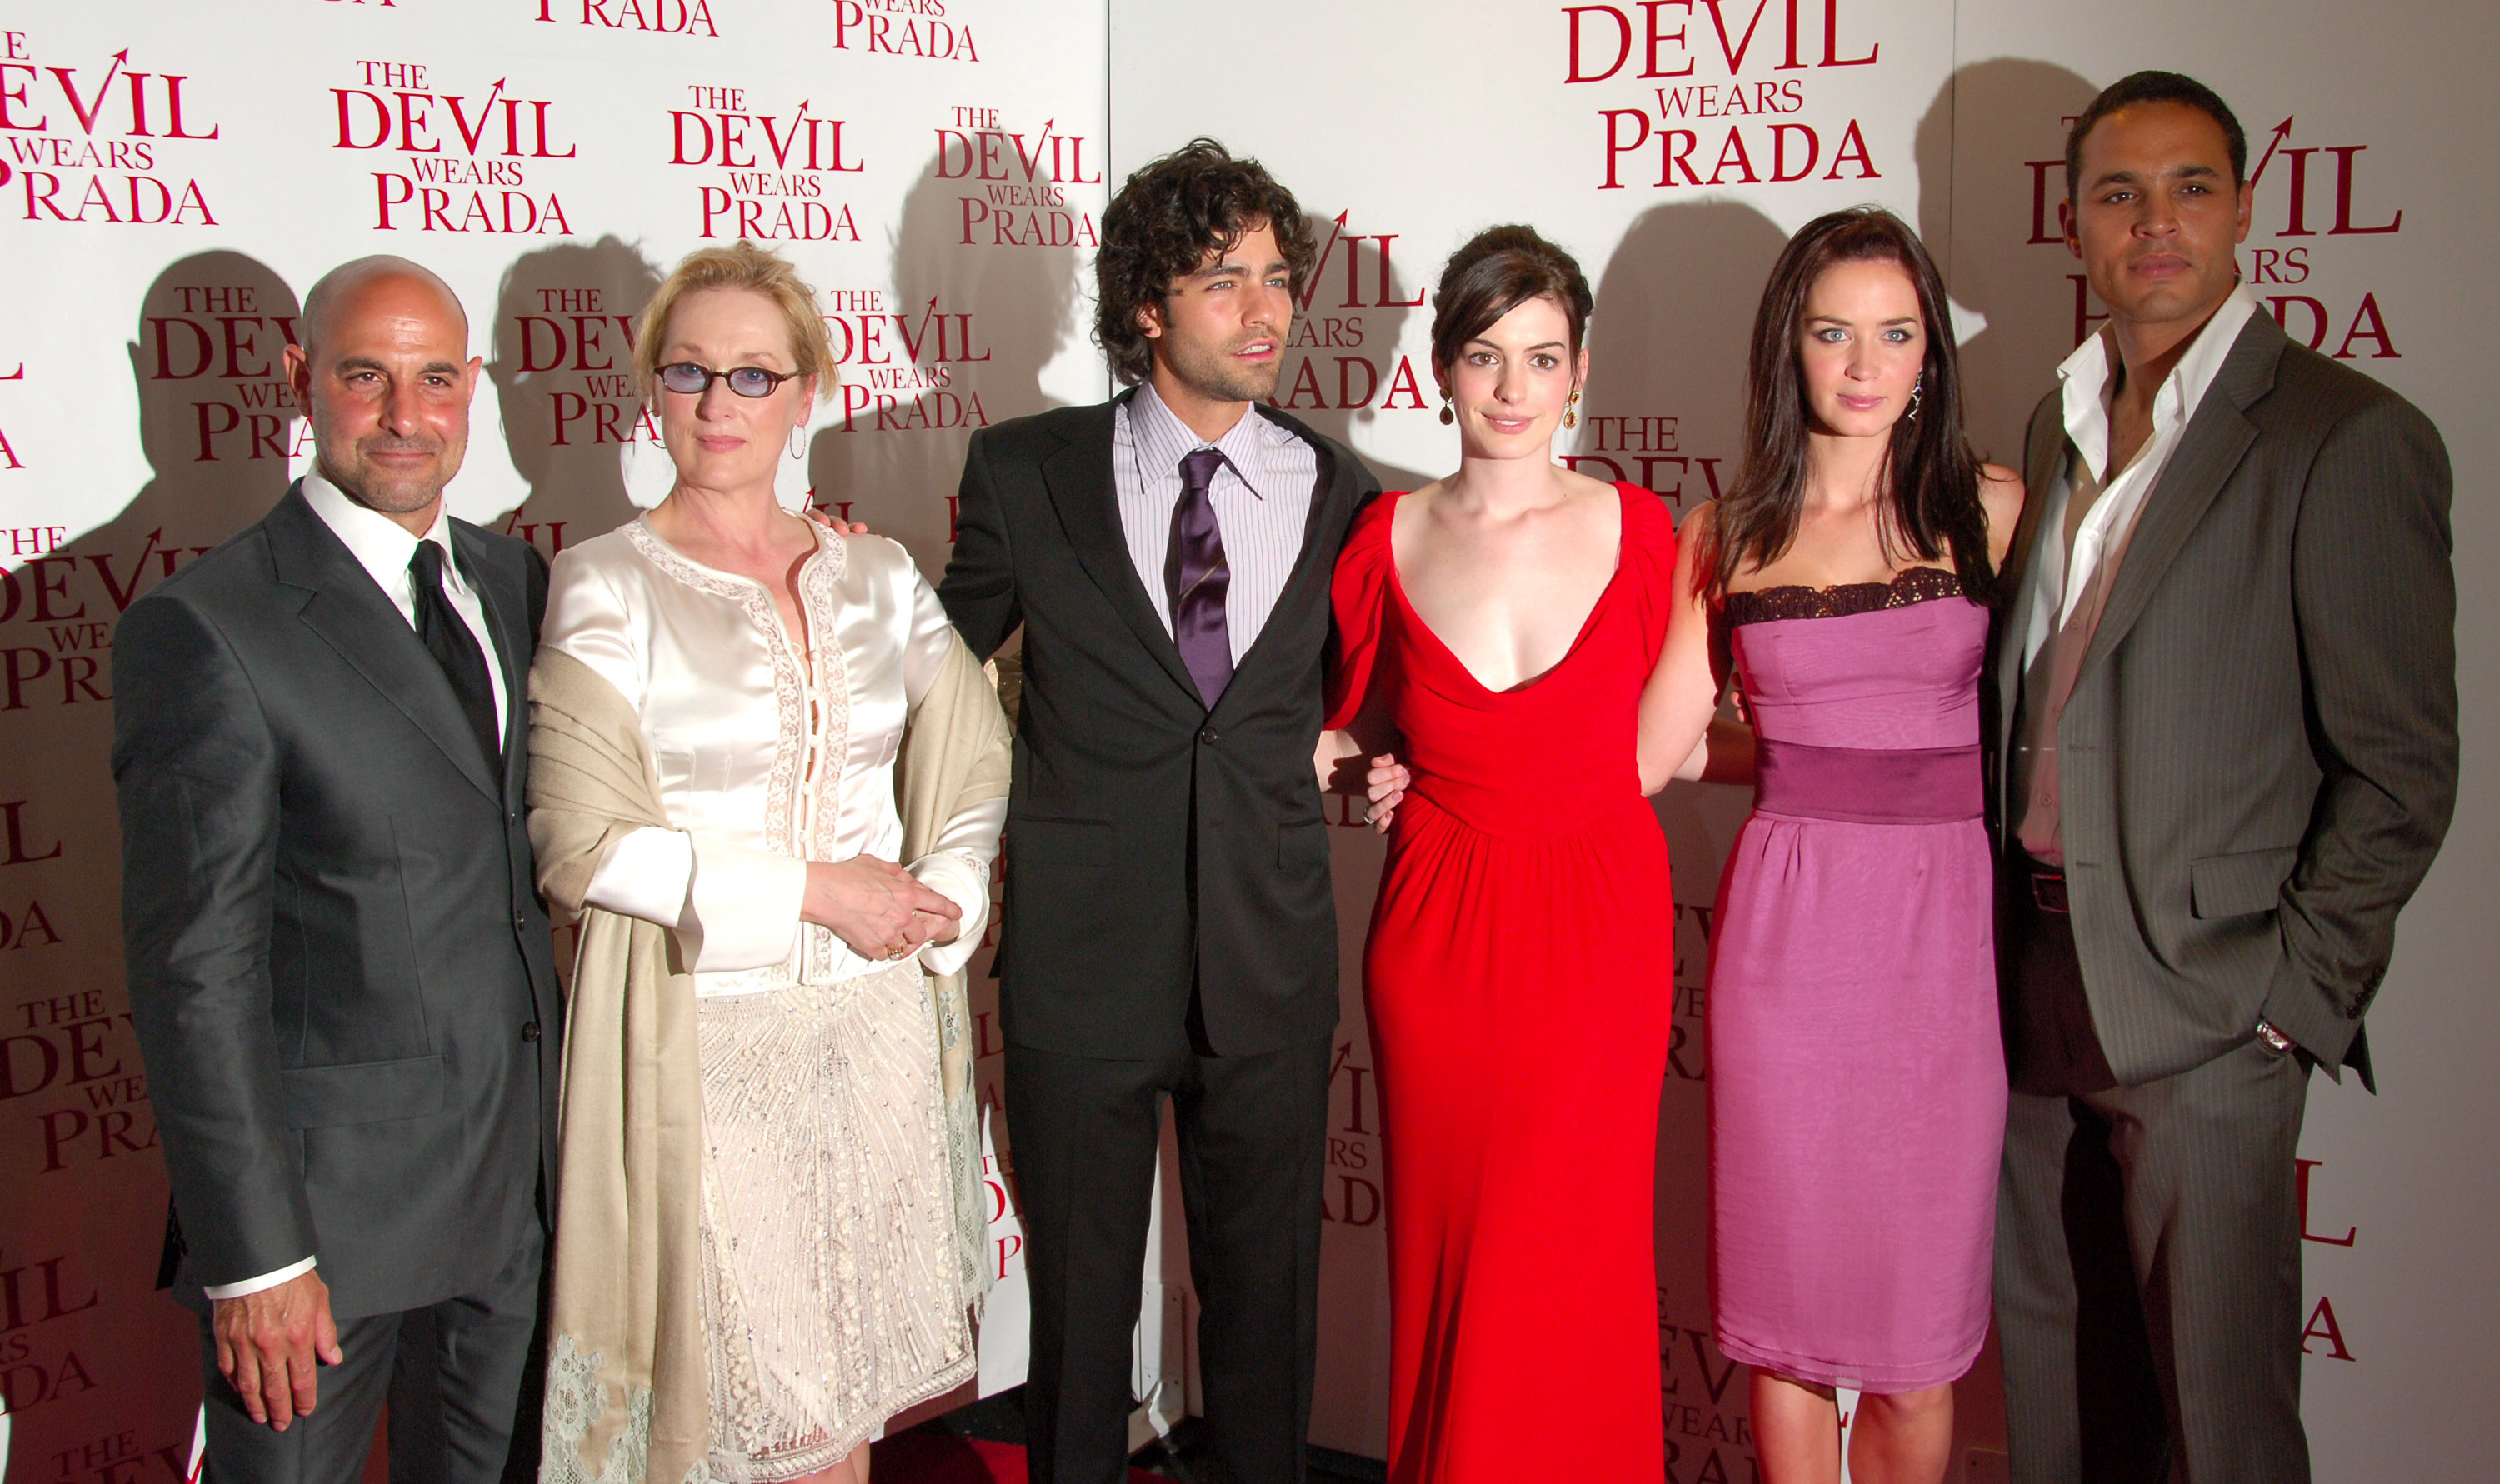 the cast of the devil wears prada on the red carpet